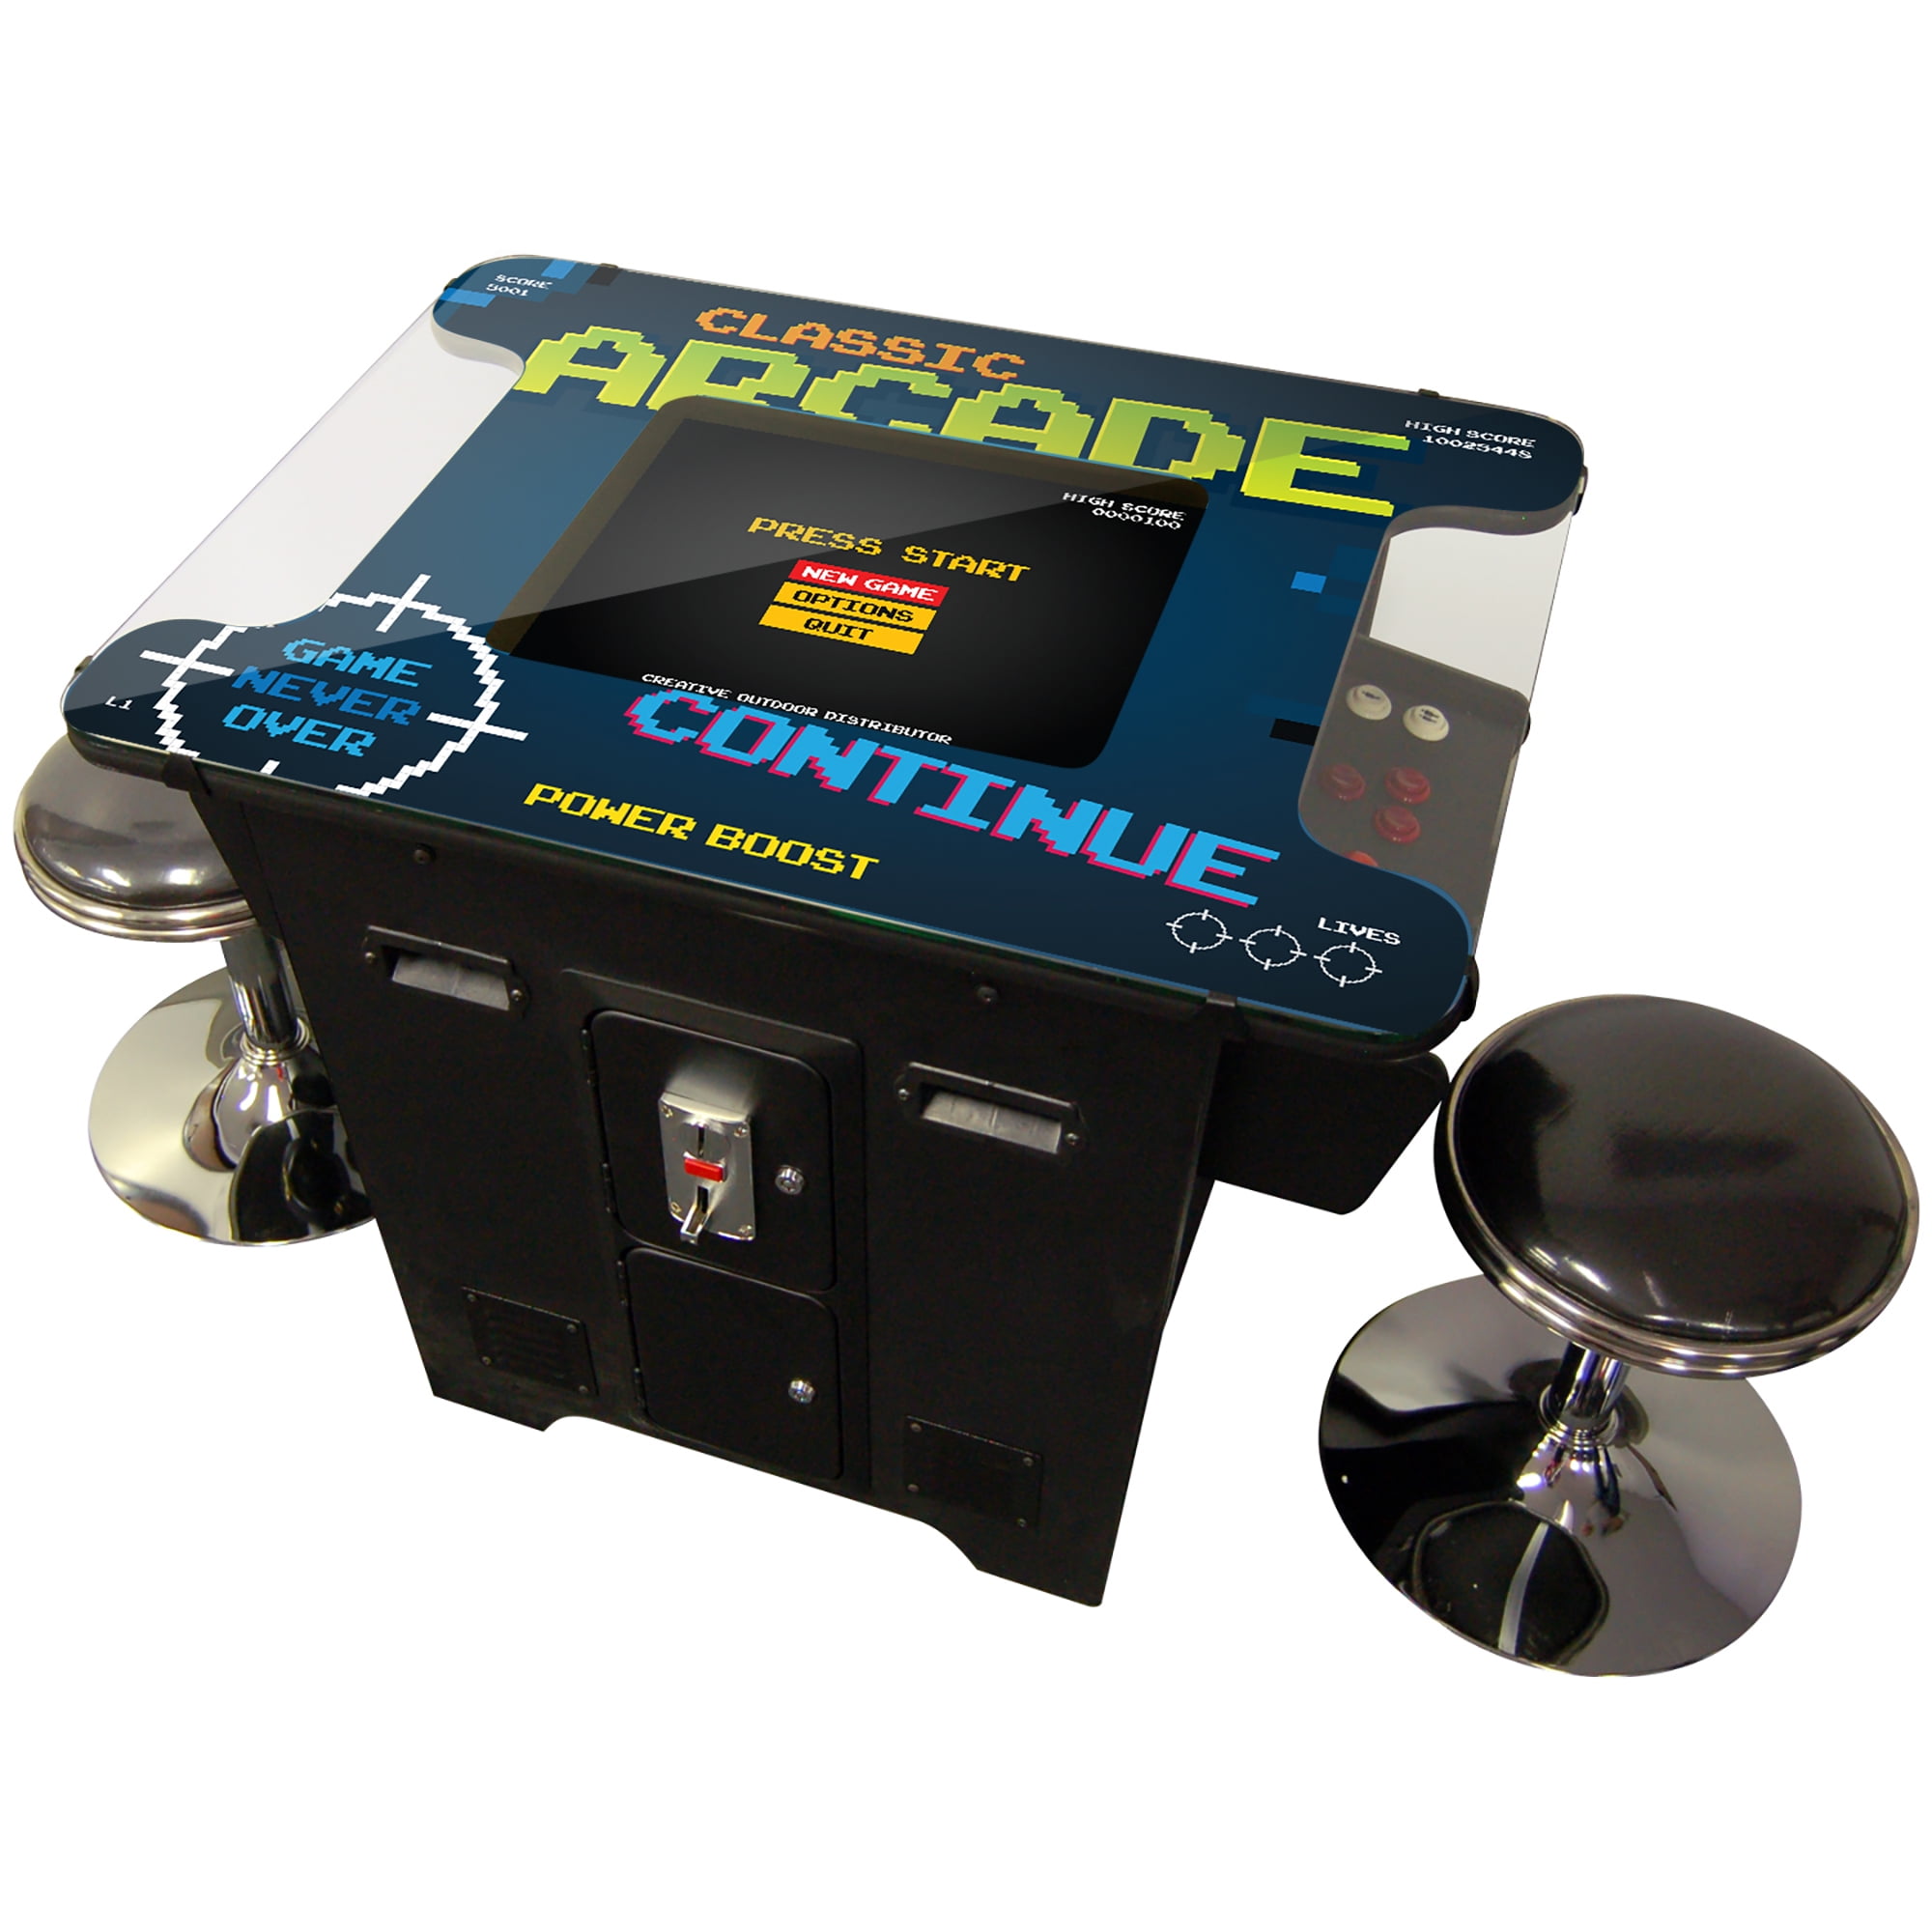 Cocktail Arcade Machine with 60 Classic Games 2 Joystick 19 Inch Screen 